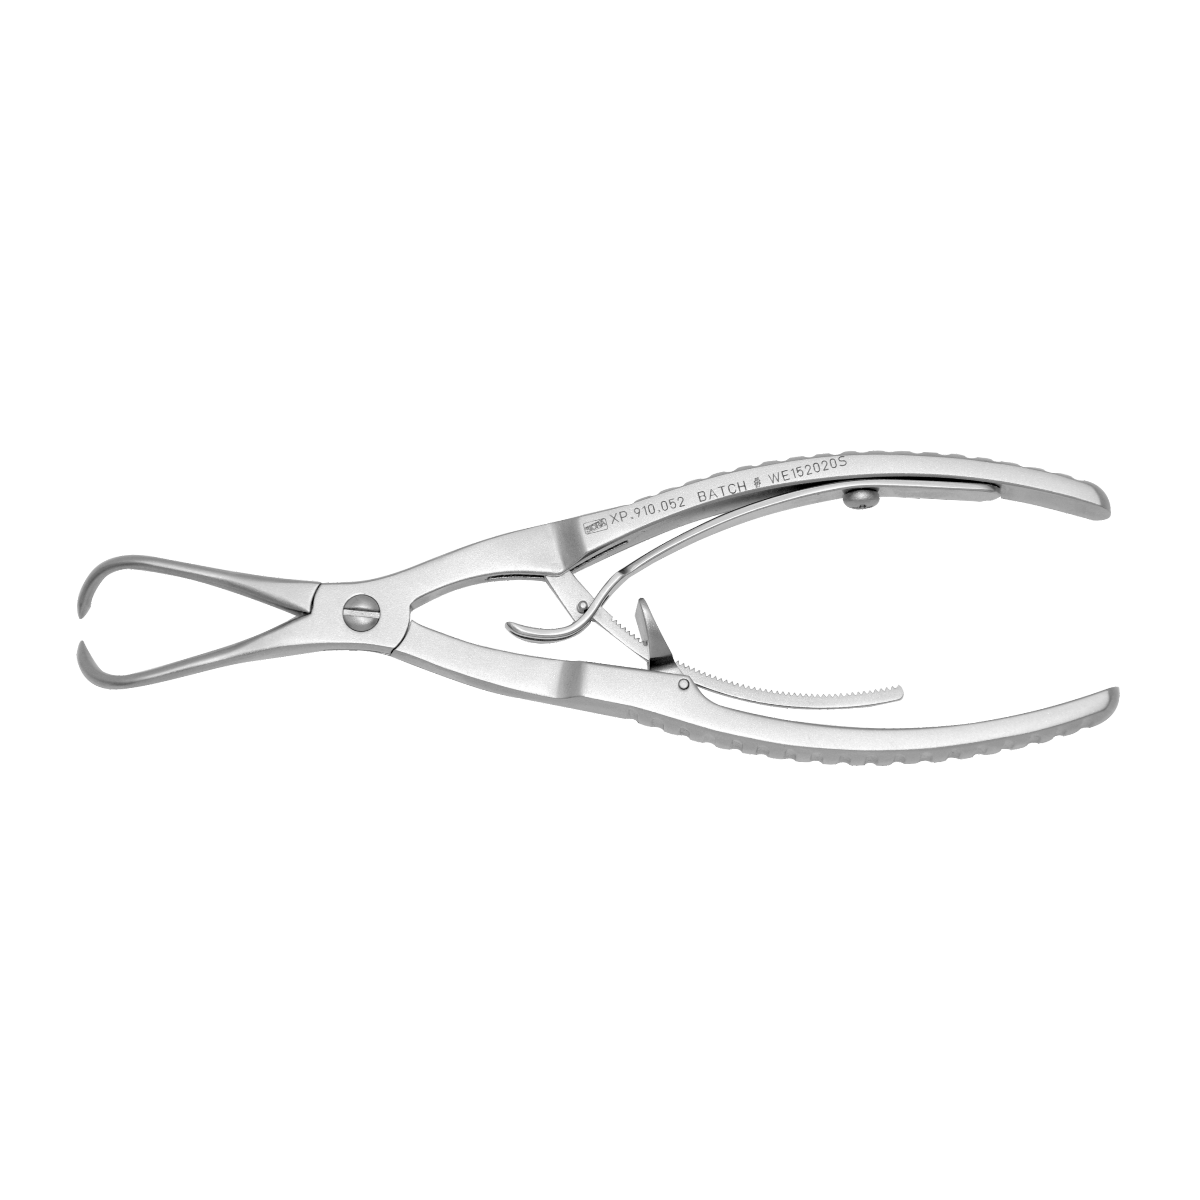 Reduction forceps With Serrated Soft Lock - 155mm